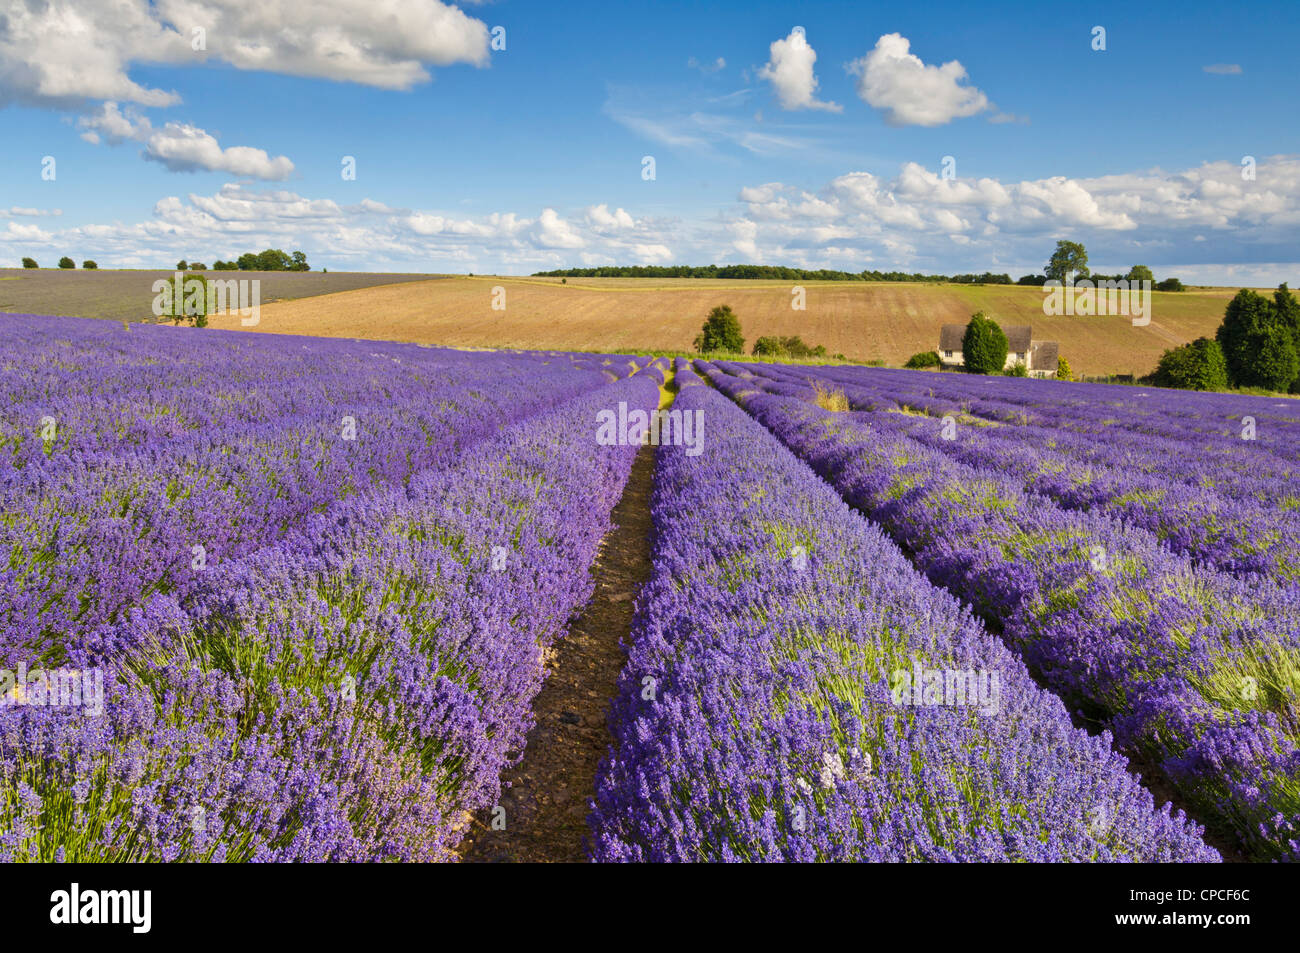 Rows of lavender plants in lavender fields at Snowshill Lavender Farm  Snowshill The Cotswolds England UK GB Europe Stock Photo